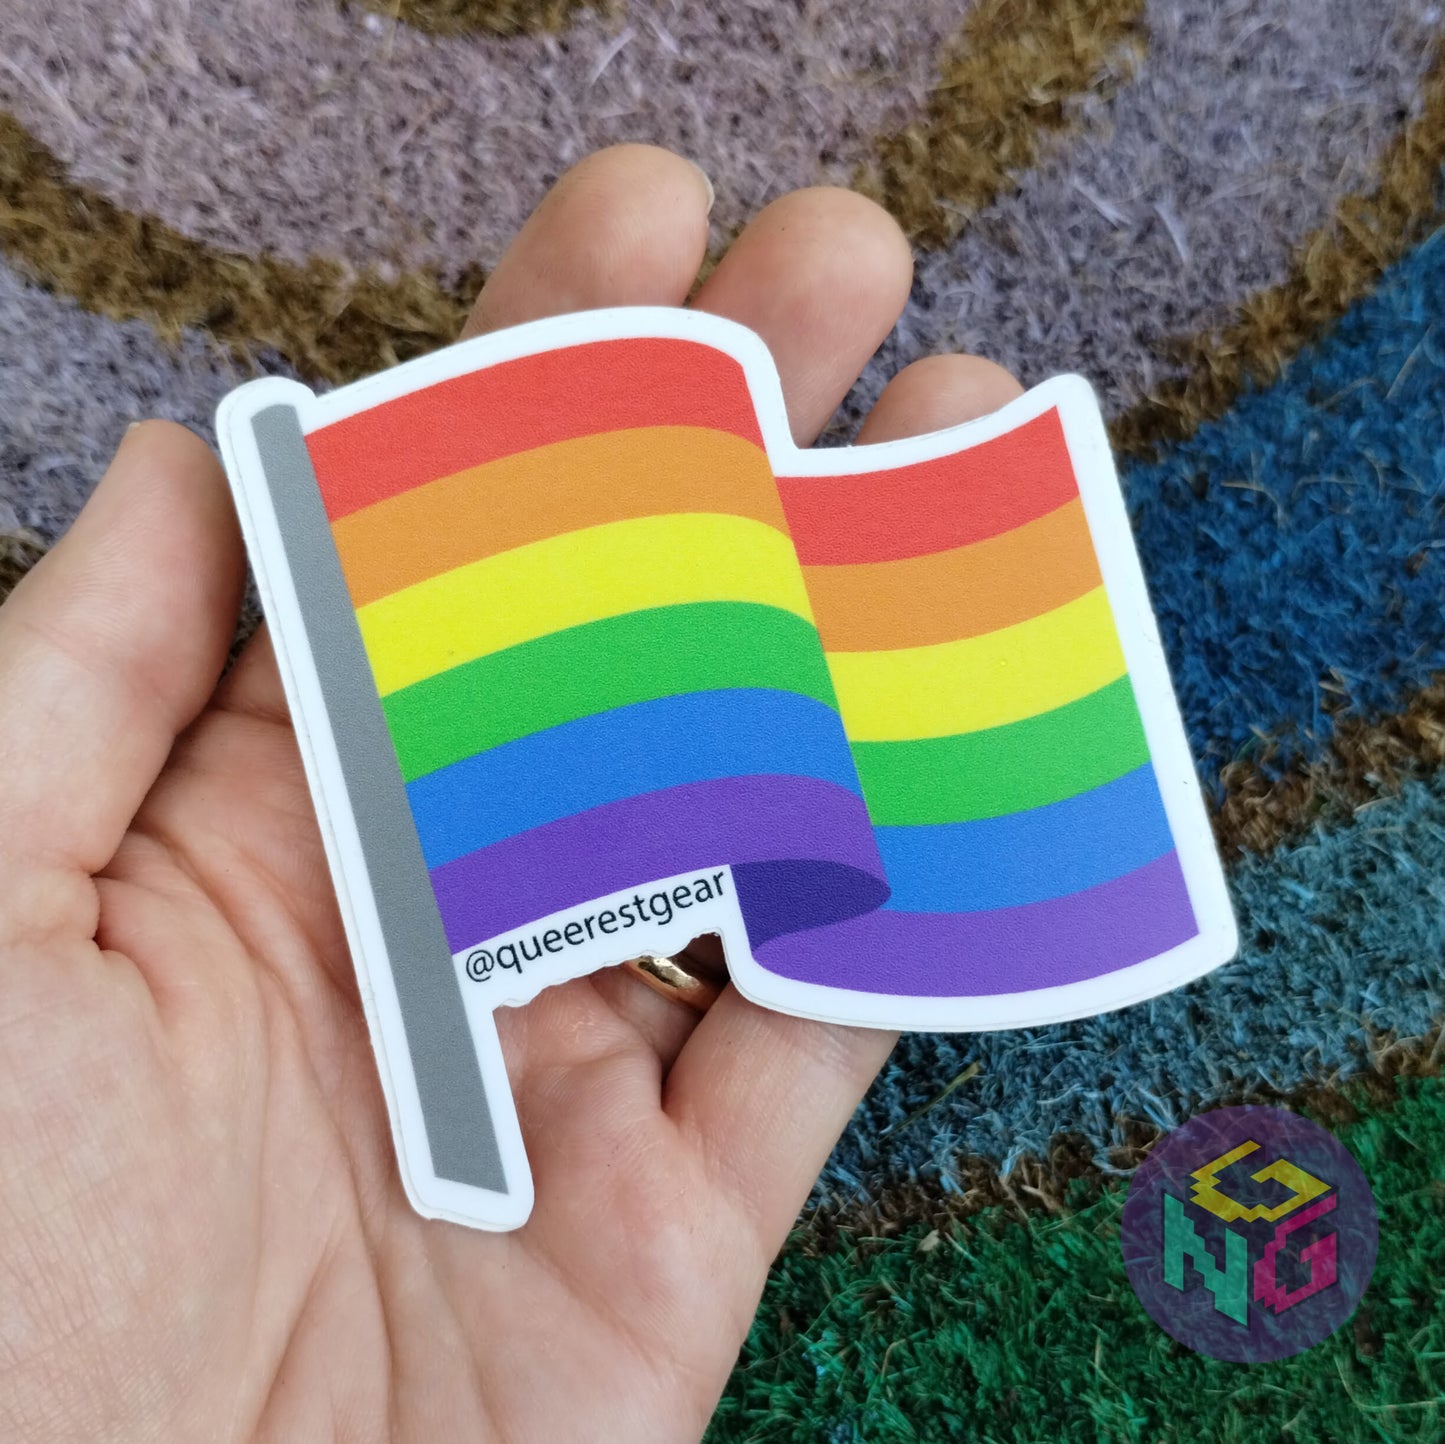 rainbow flag sticker held in a hand on a background of a rainbow welcome mat